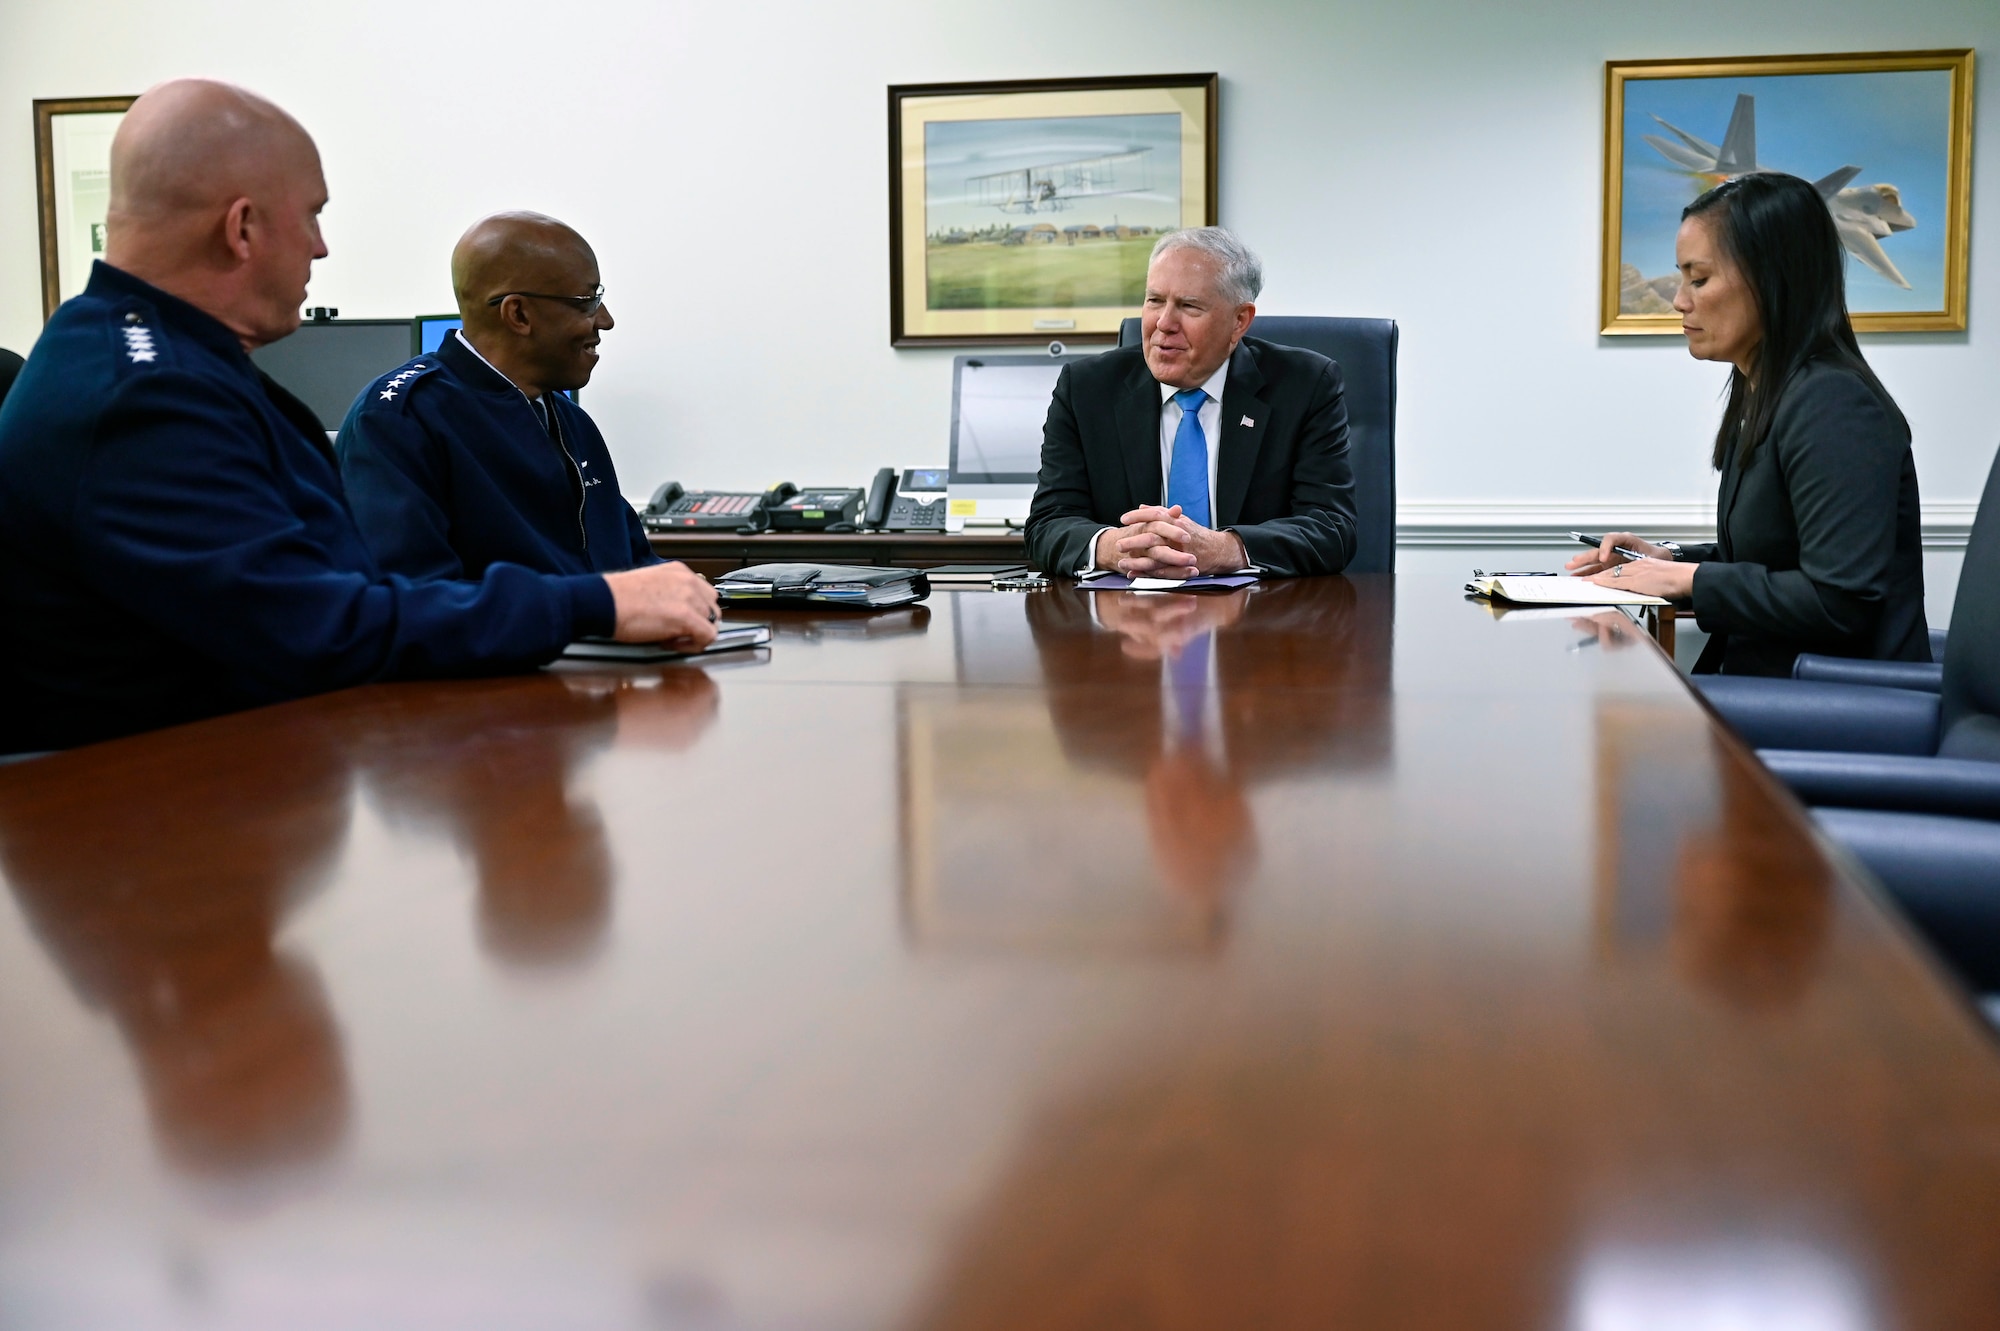 Chief of Space Operations Gen. John W. “Jay” Raymond, Air Force Chief of Staff Gen. CQ Brown, Jr., Secretary of the Air Force Frank Kendall and Under Secretary of the Air Force Gina Ortiz Jones speak